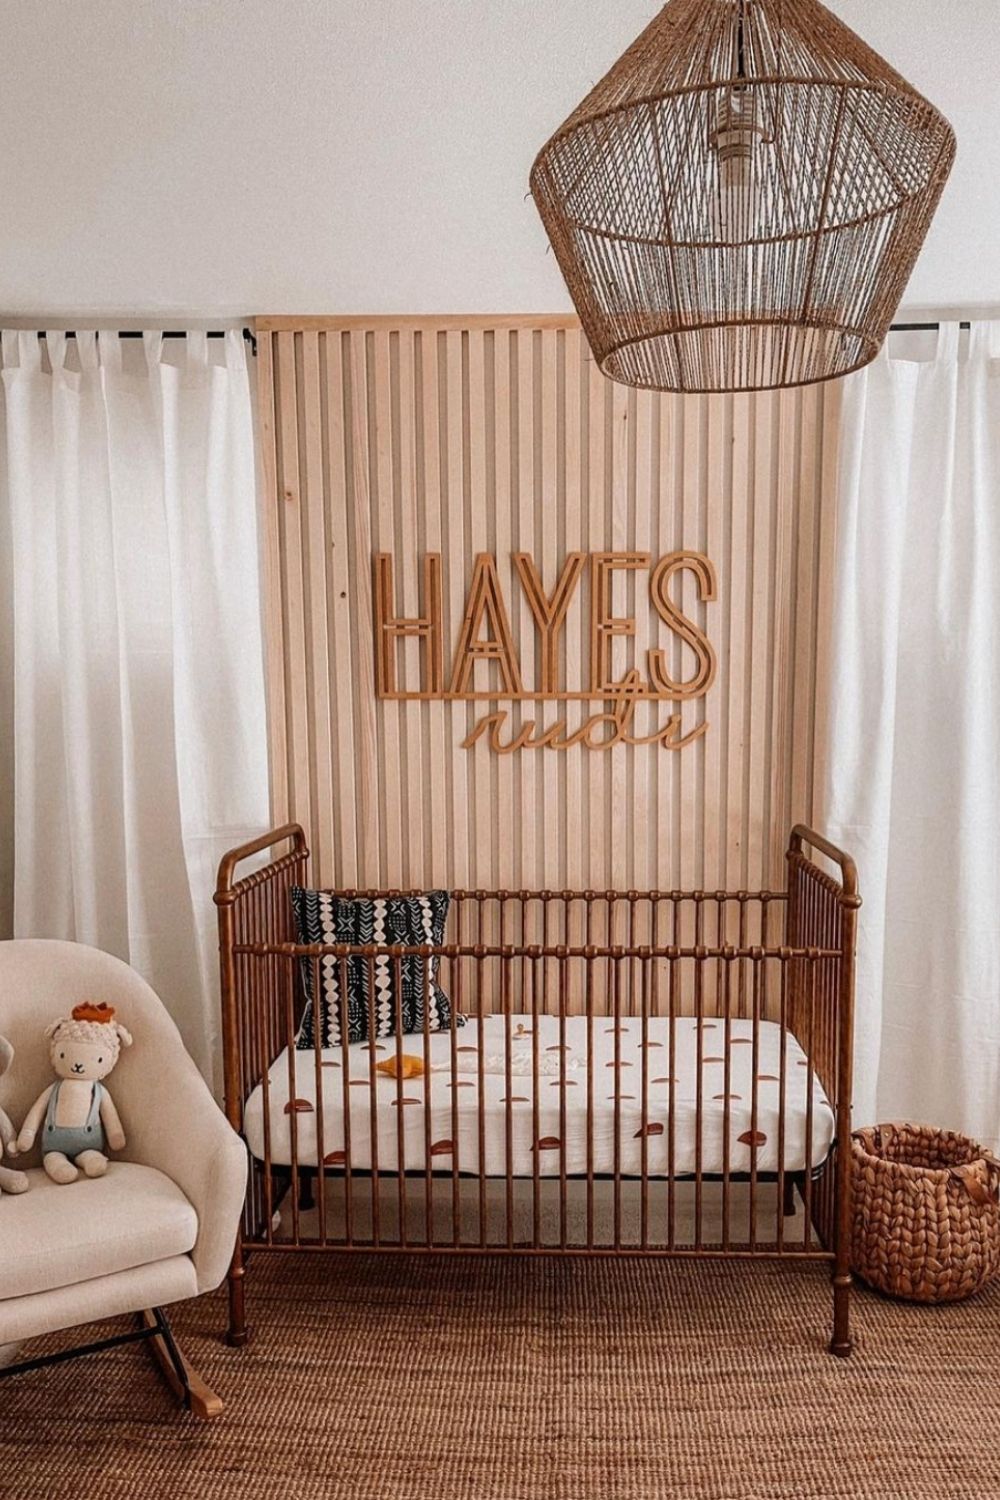 24 Lovely Nursery Room Ideas To Bring Up Your Baby With Taste 